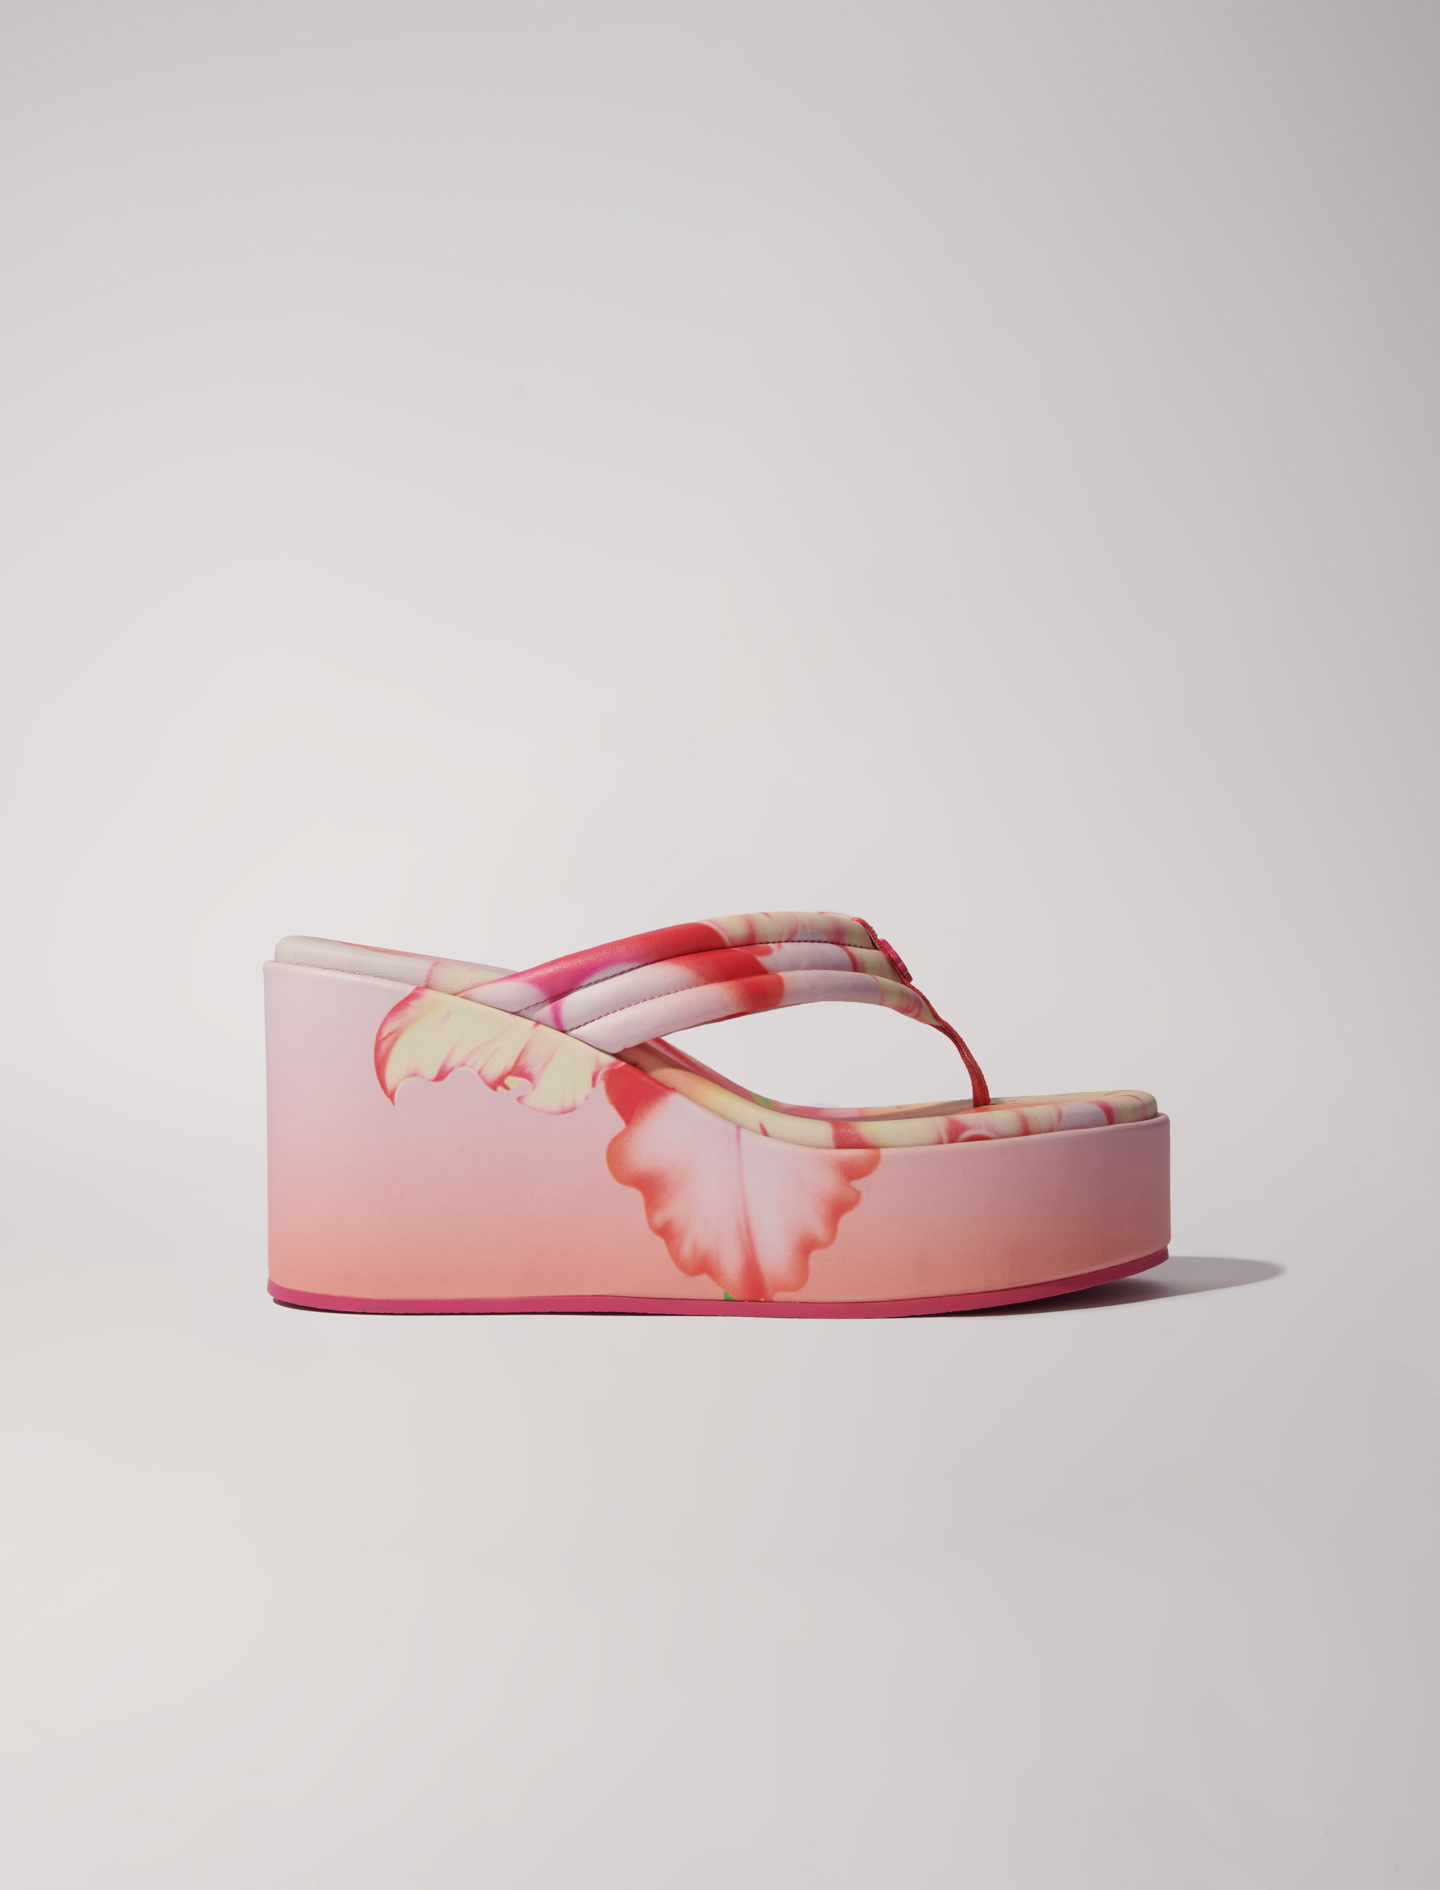 Maje Woman's rubber Upper: cow Sock lining: sheepskin Band: Flower print wedge sandals, in color Pink / Red